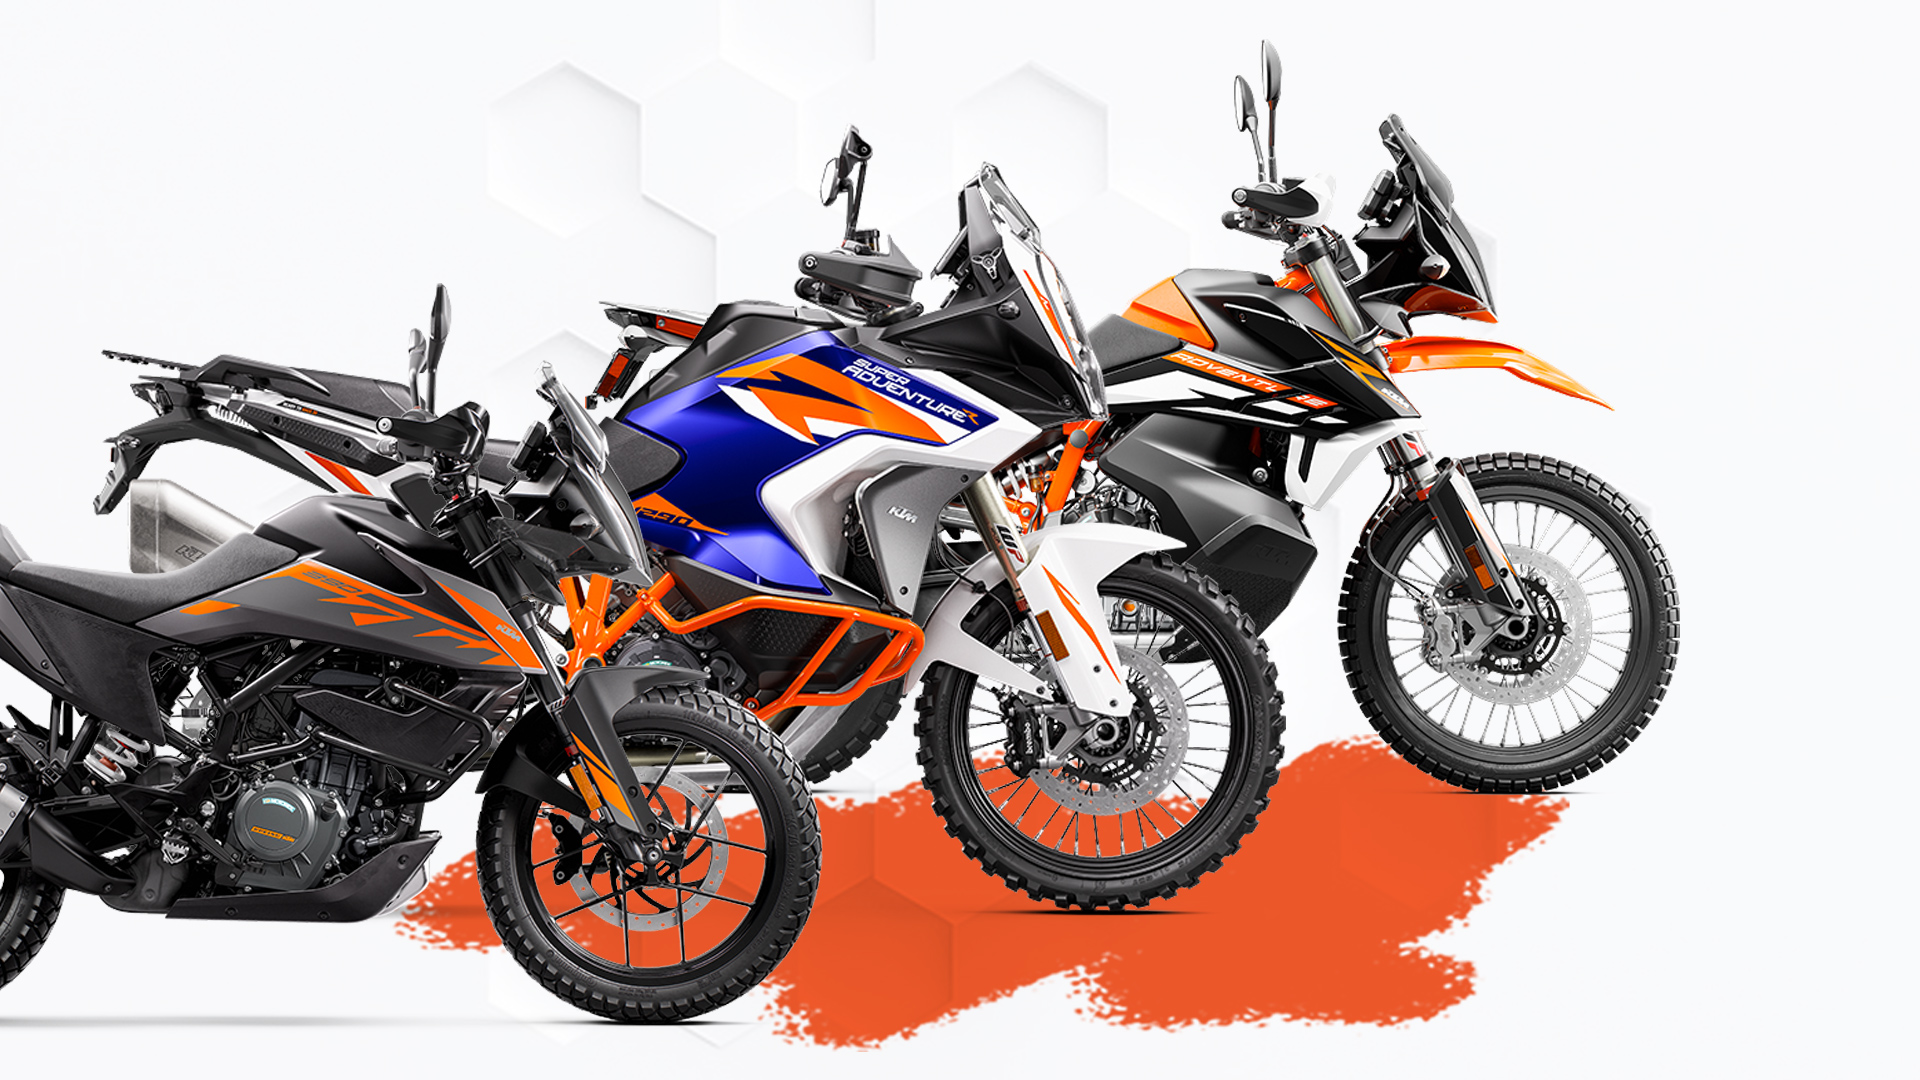 The 2022 KTM Motorcycle Lineup + Our Take On Each Model